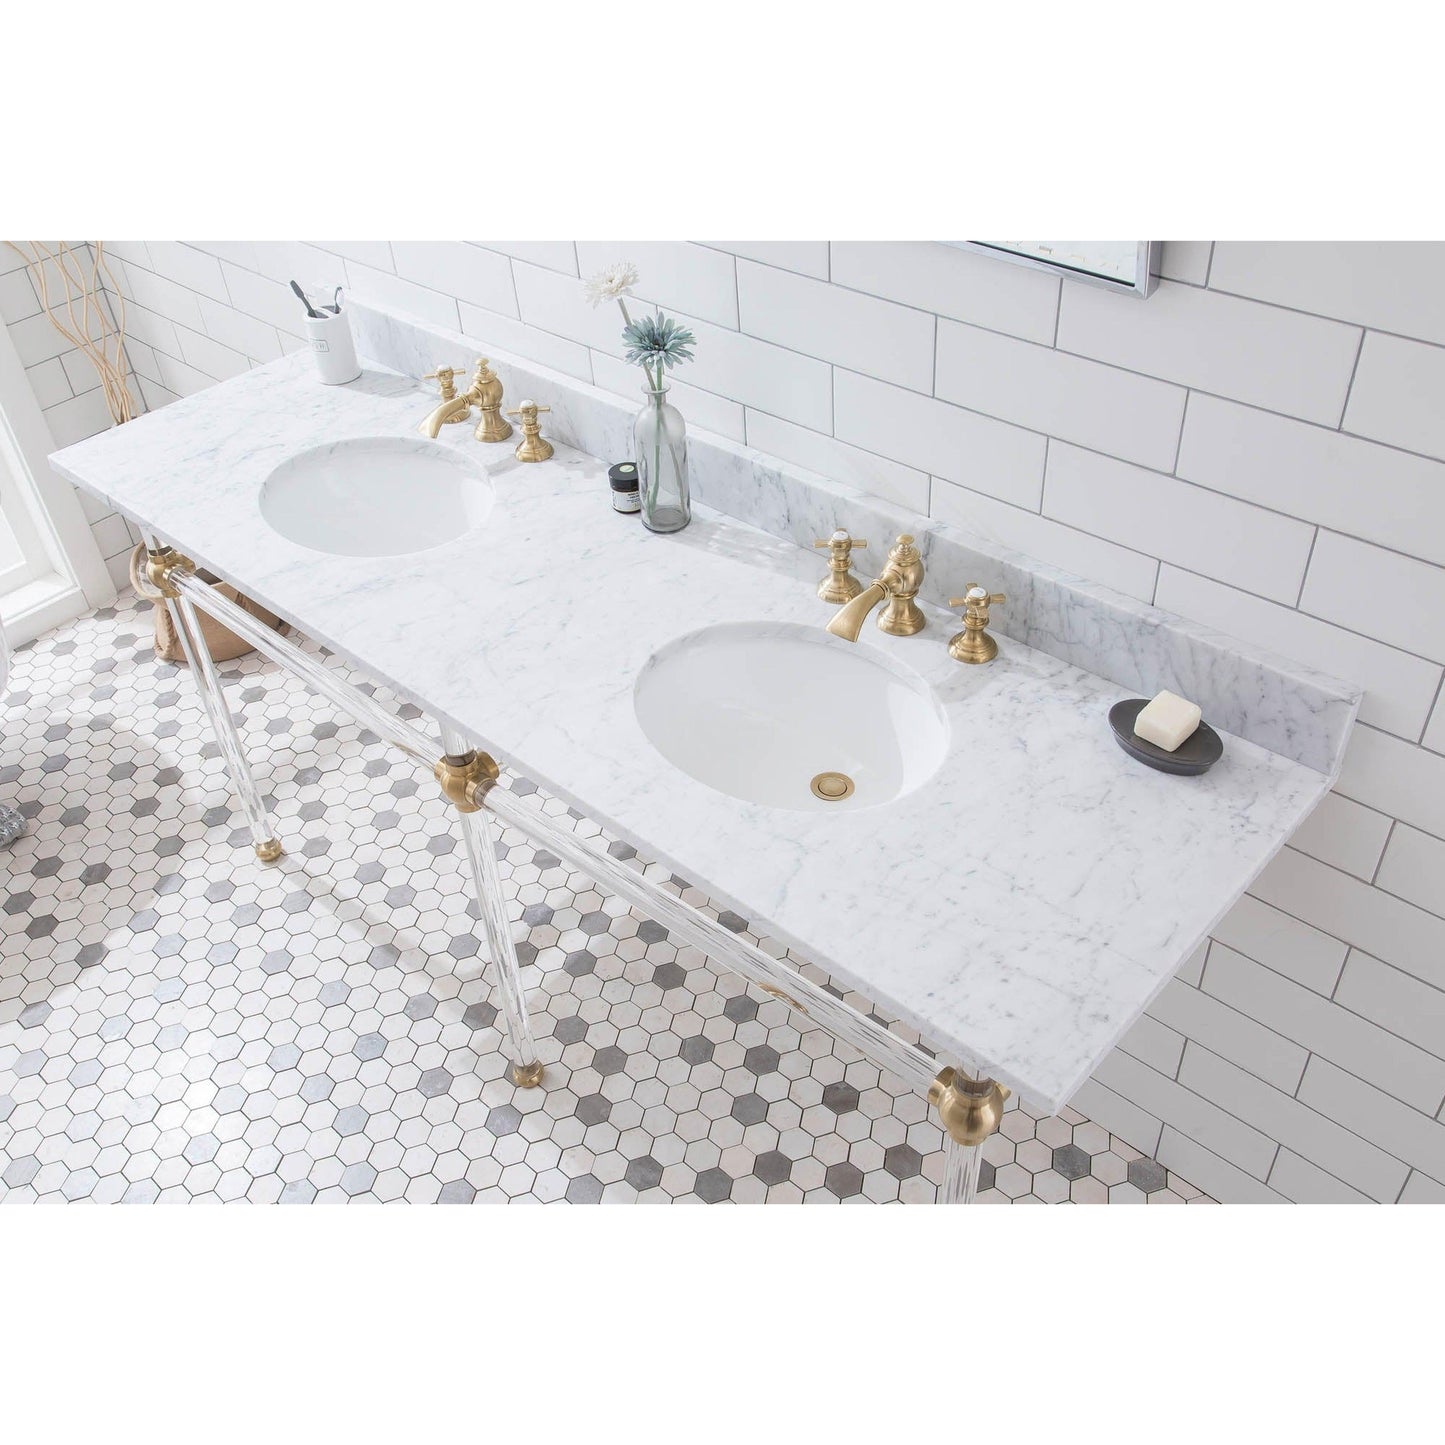 Water Creation Empire 72" Wide Double Wash Stand, P-Trap, Counter Top with Basin, and F2-0013 Faucet included in Satin Gold Finish